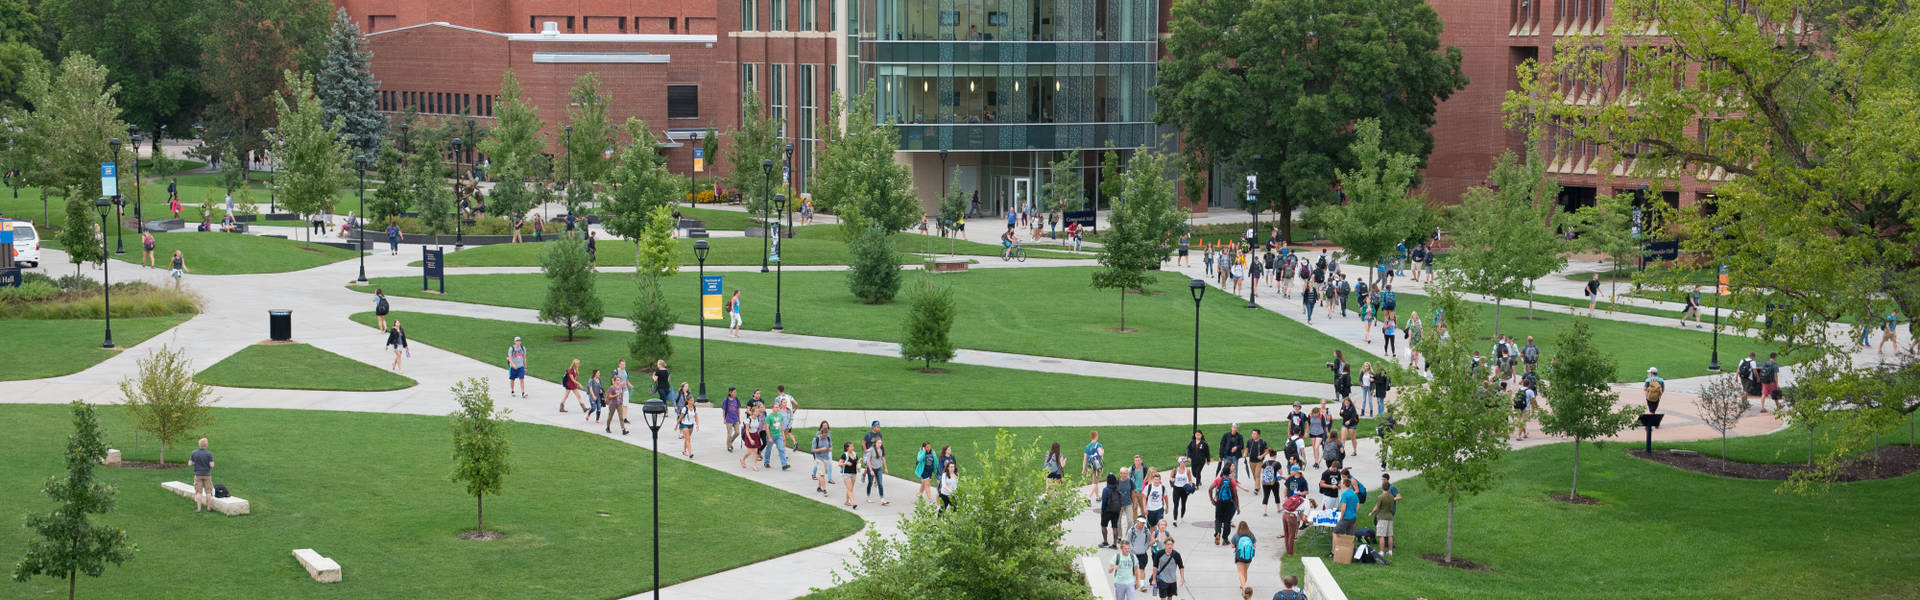 Students walking across campus mall